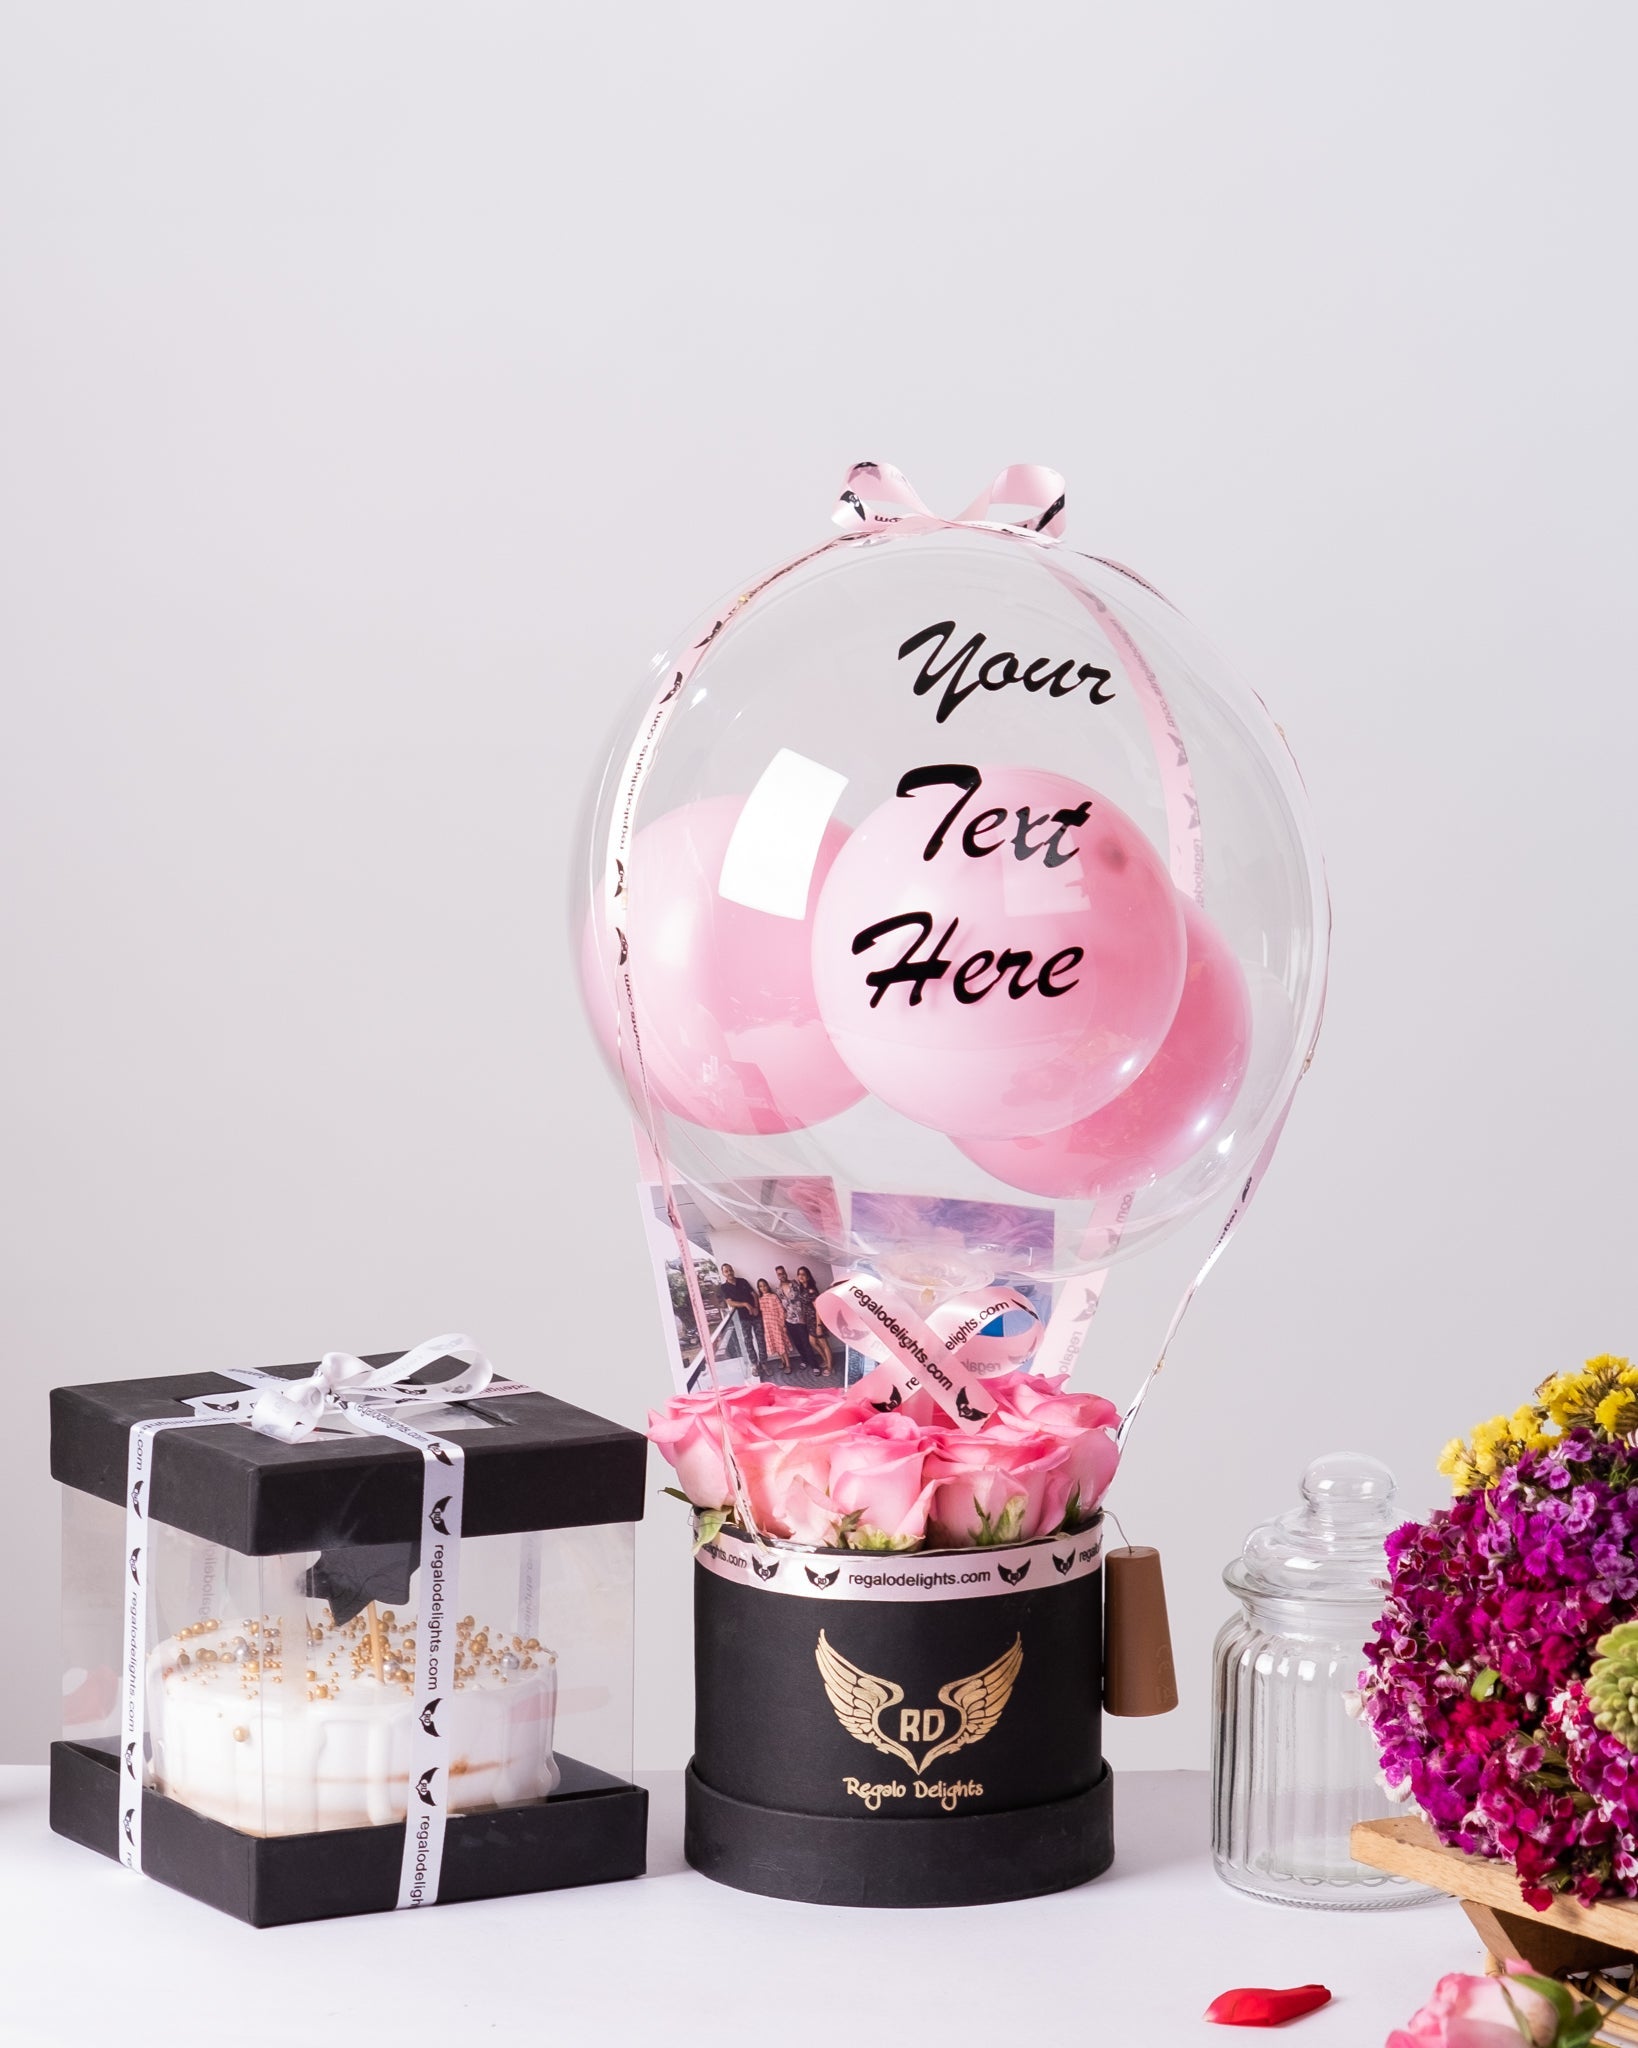 Pink Rose & Photos Bouquet with Cake Regalo Delights